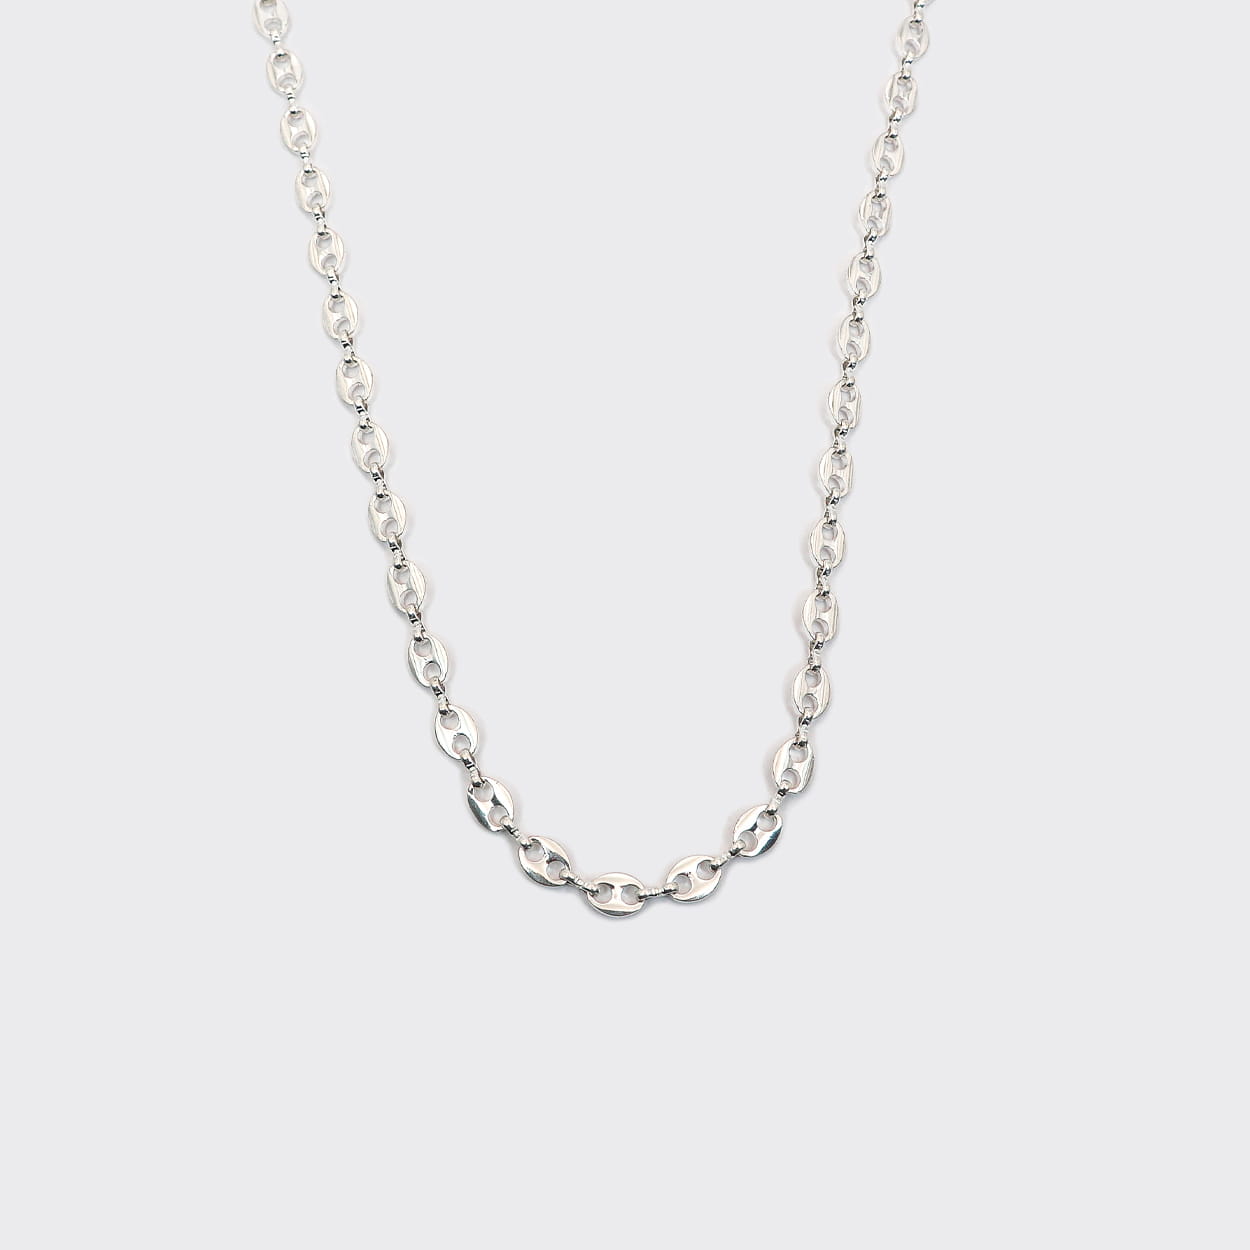 Atelier Domingo's La Mar necklace is the classic coffee beans chain. It is made in Spain and this jewelry is made for both men and women. This unisex necklace is made of a high-quality 925 Sterling silver plating.